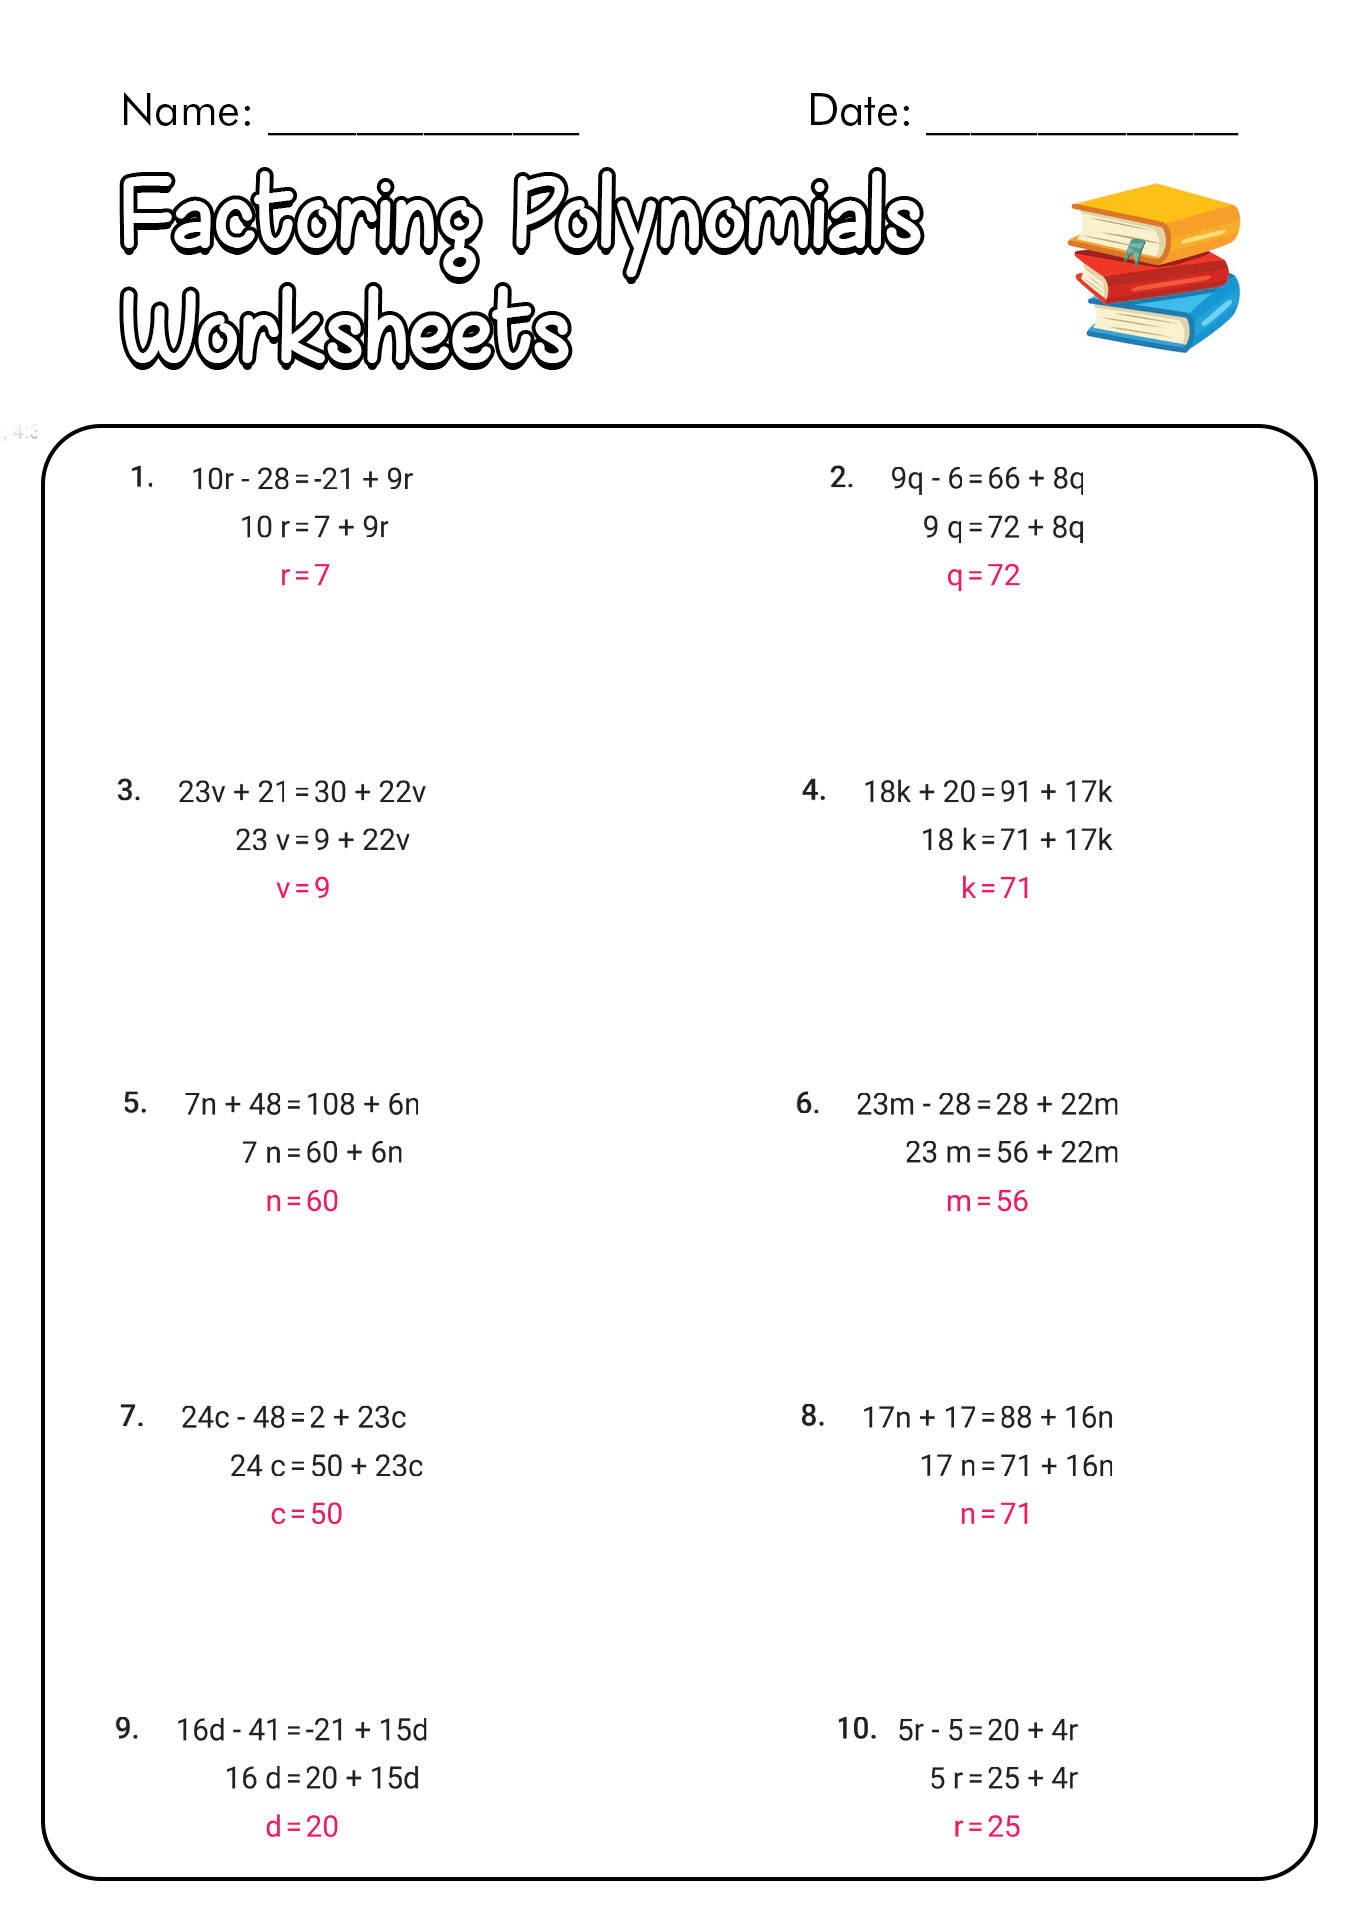 Factoring Polynomials Worksheet with Answers